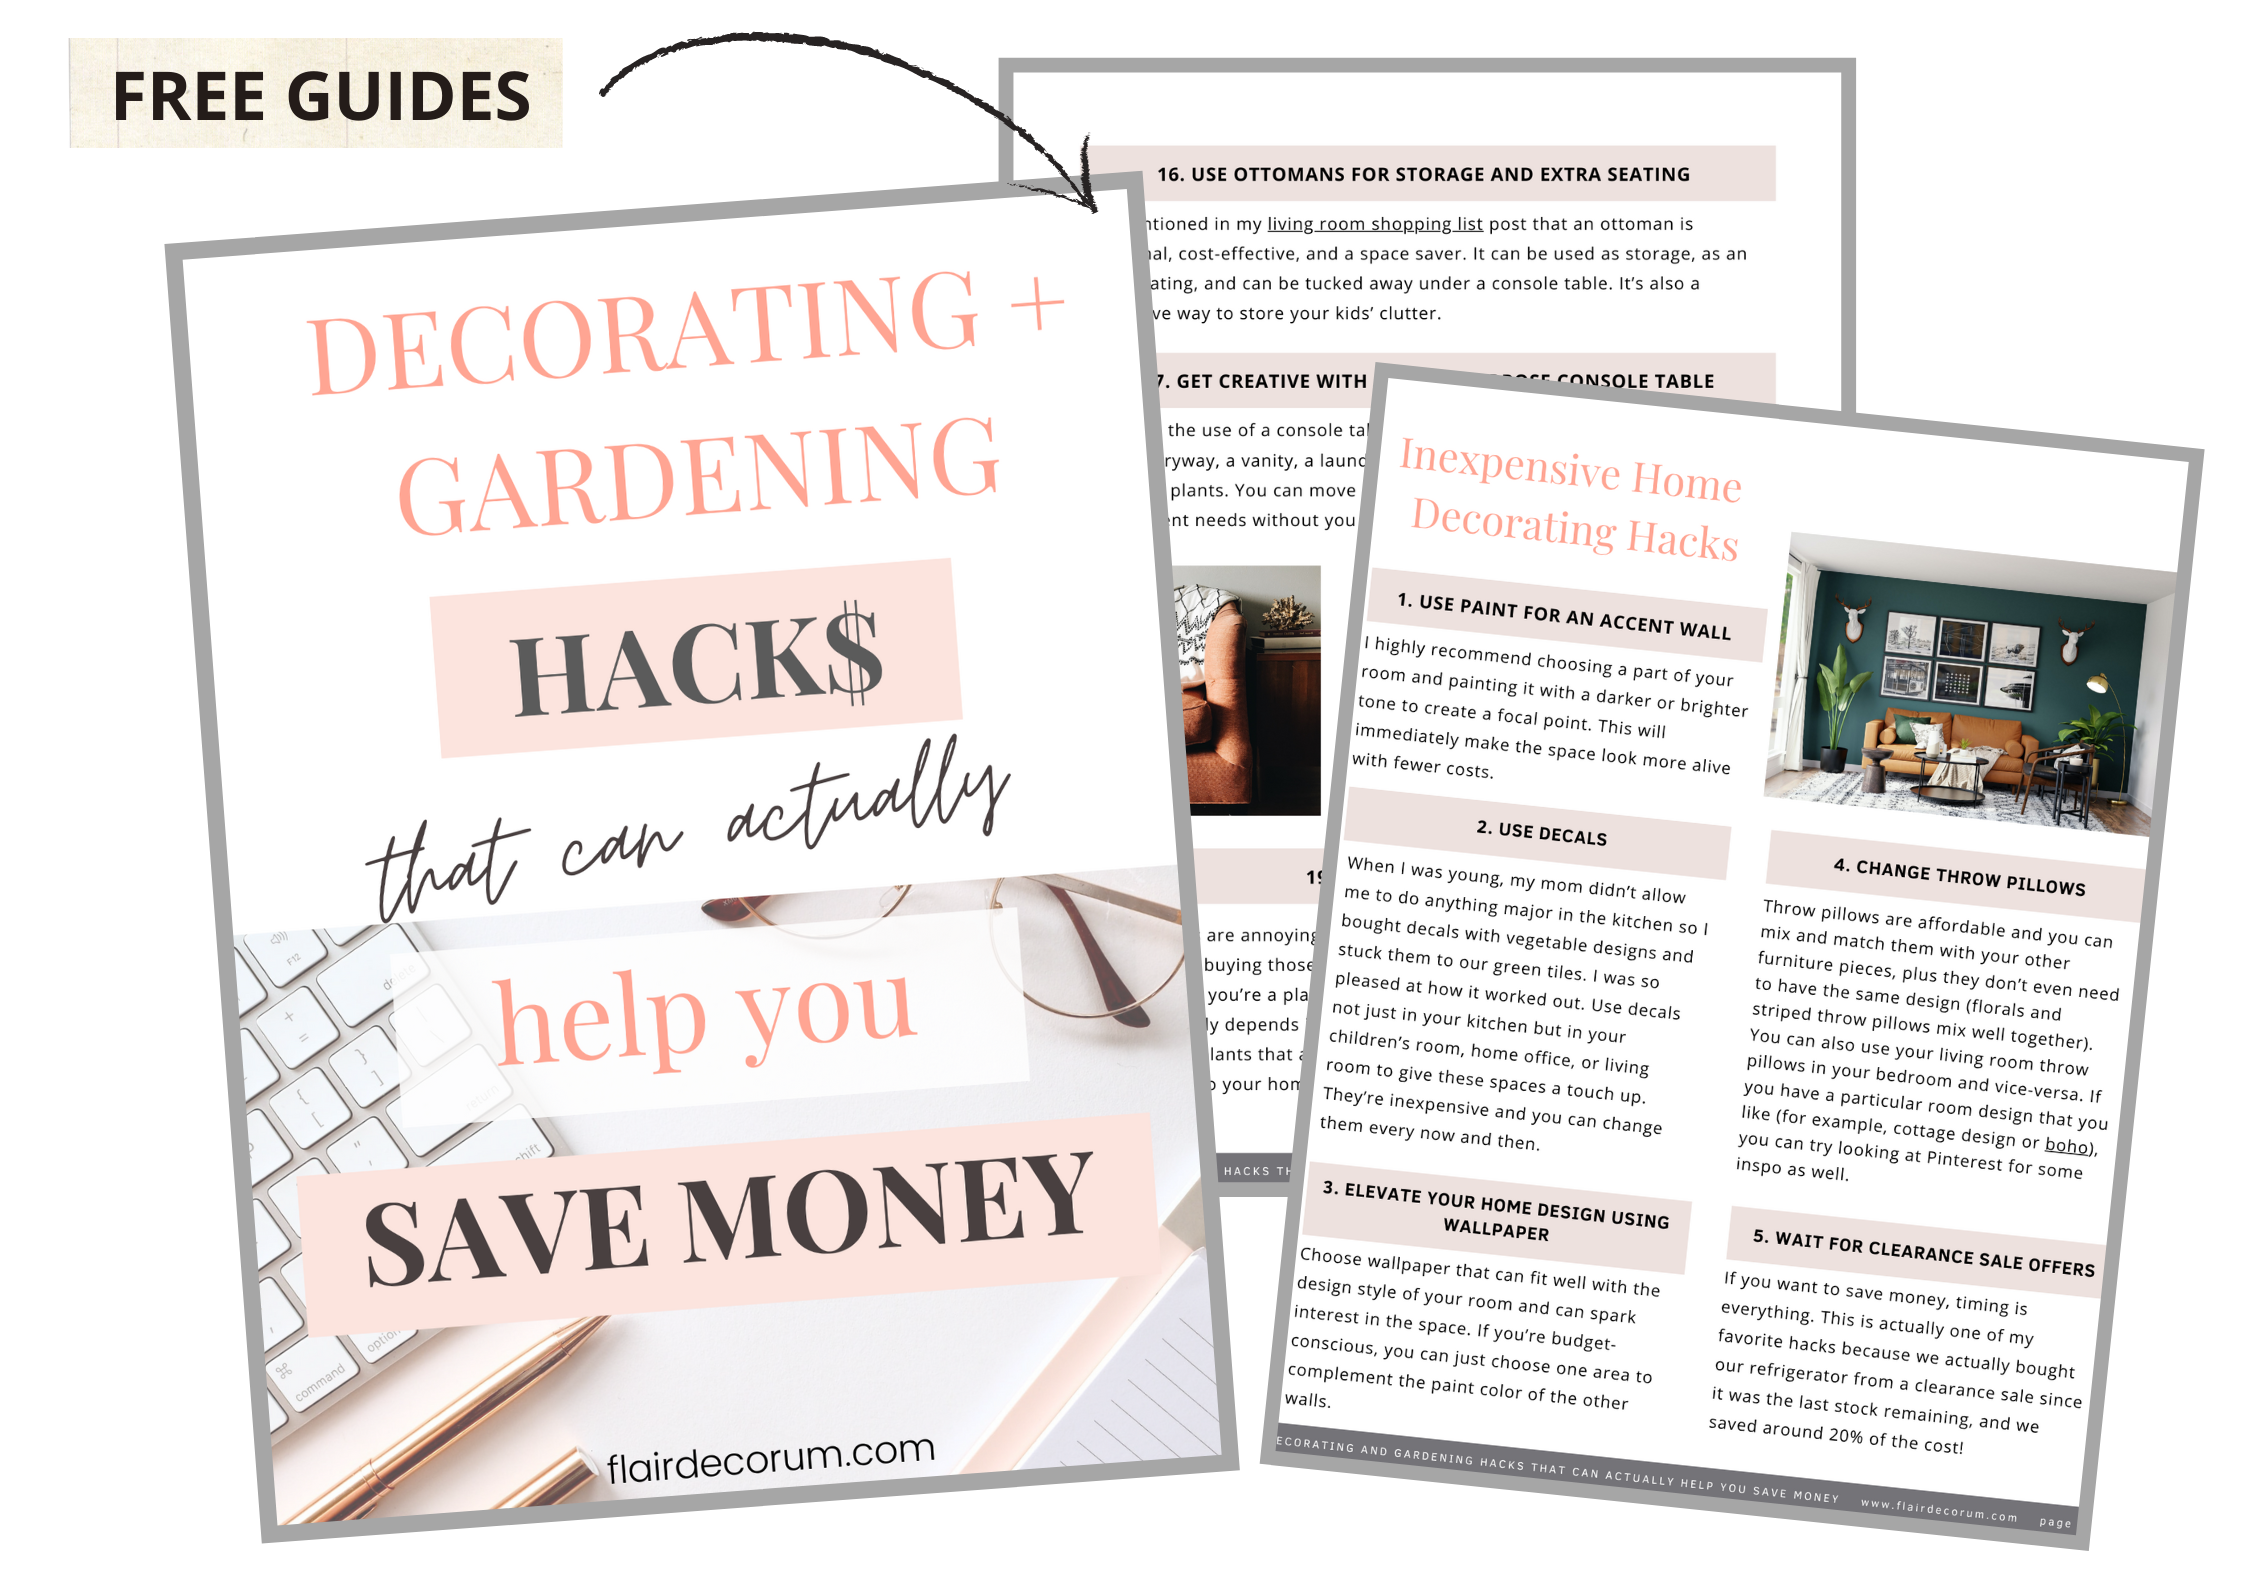 A2 Home and Gardening Hacks that Saves You Money